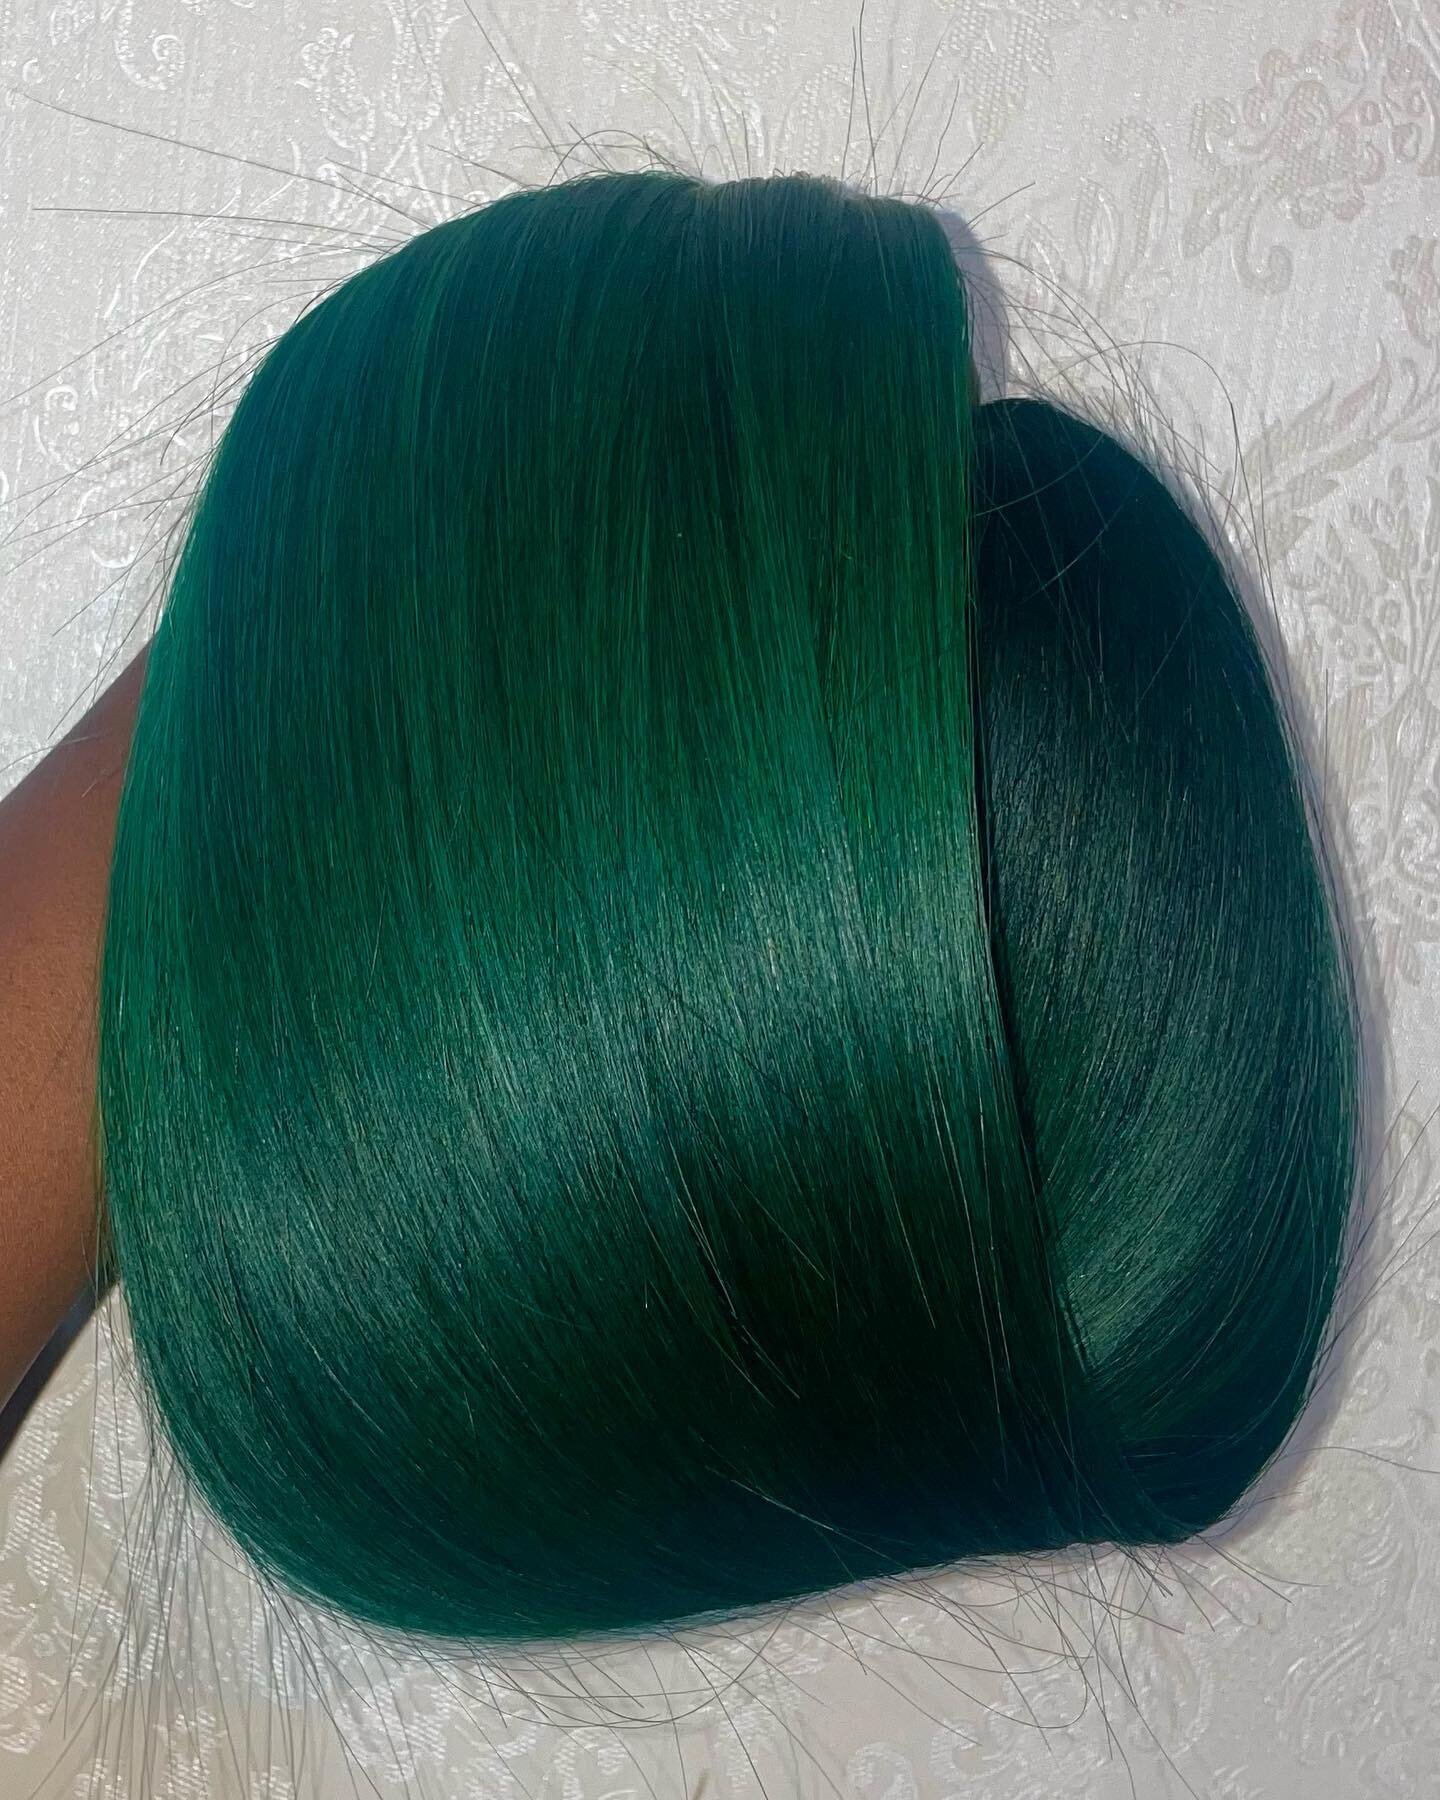 &hearts; Zoom in and take a look at a PROPER reverse ombr&eacute;&hellip; not that 2/3 shades of adore on 613 hair nonsense! 

Natural brown (1B) raw hair lifted to a gradational level 9 to level 5 base, overlayed with a smokey green for the perfect 